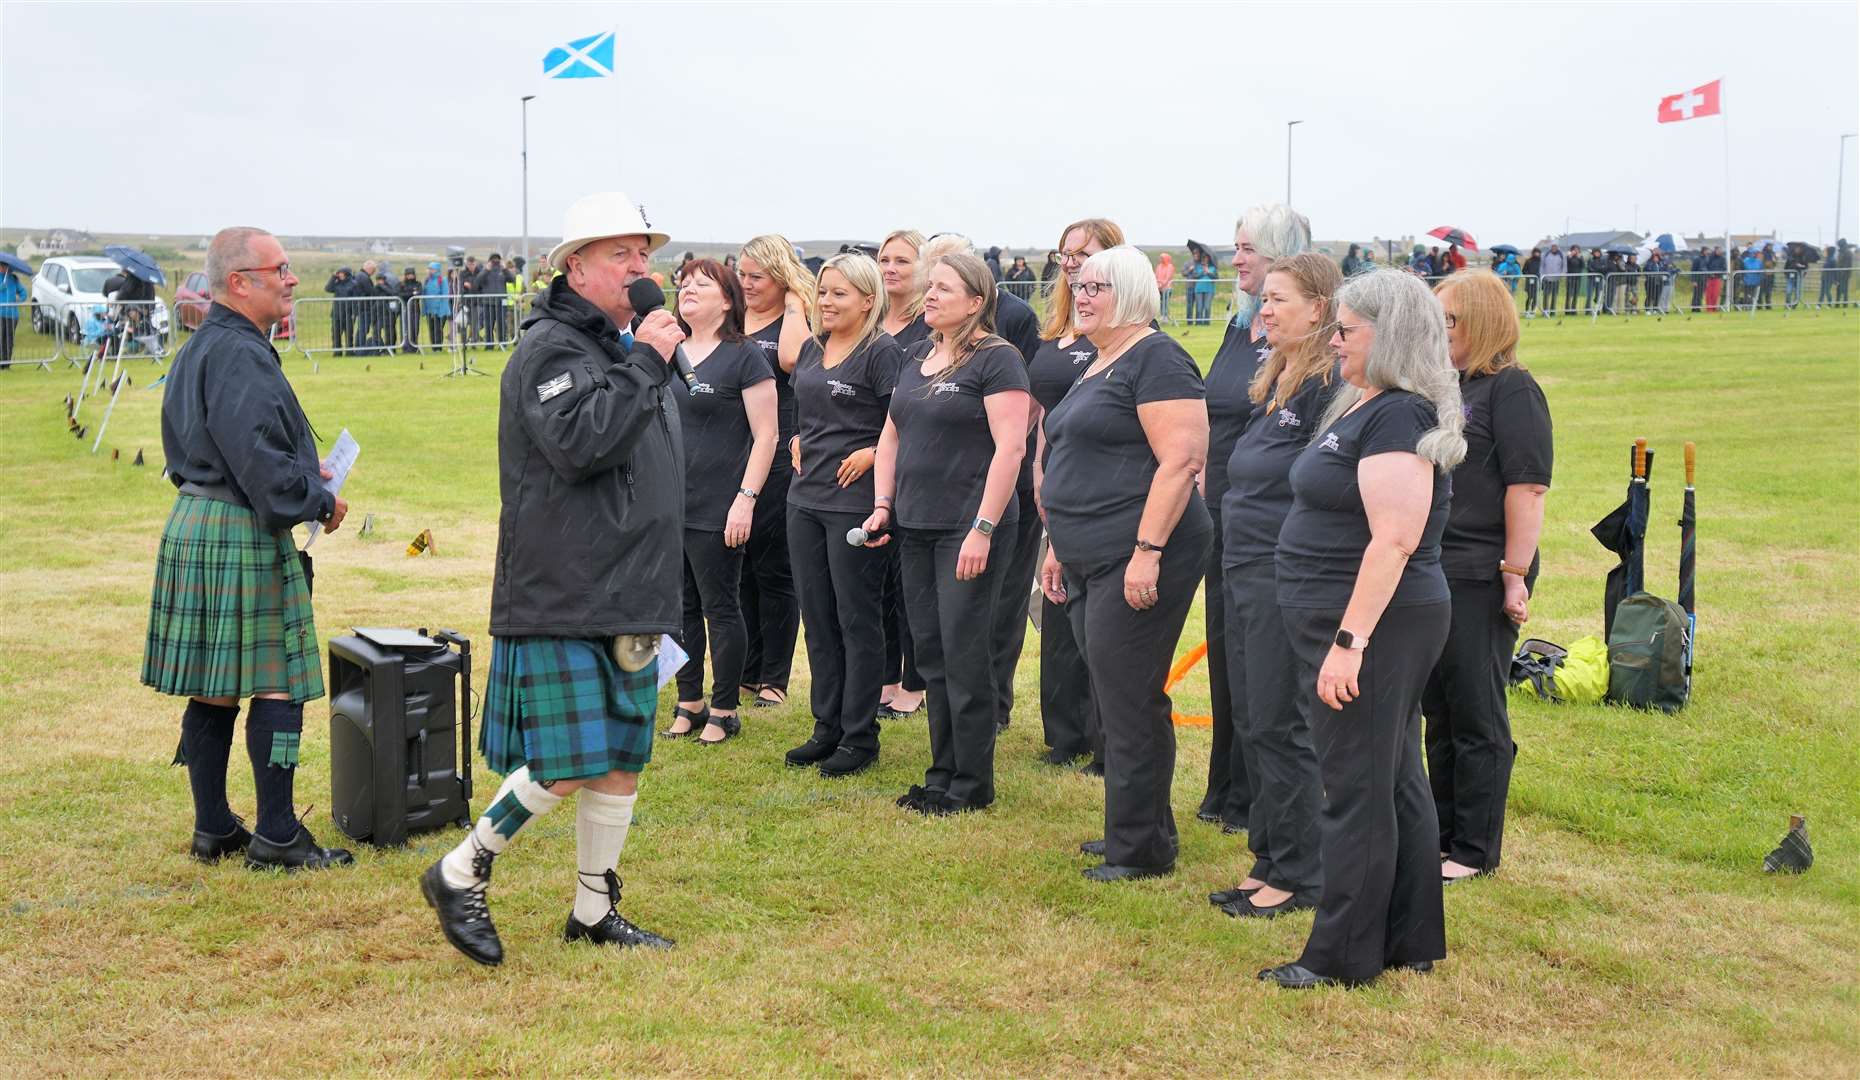 Inverness Military Wives Choirs sing for the prince. Picture: DGS